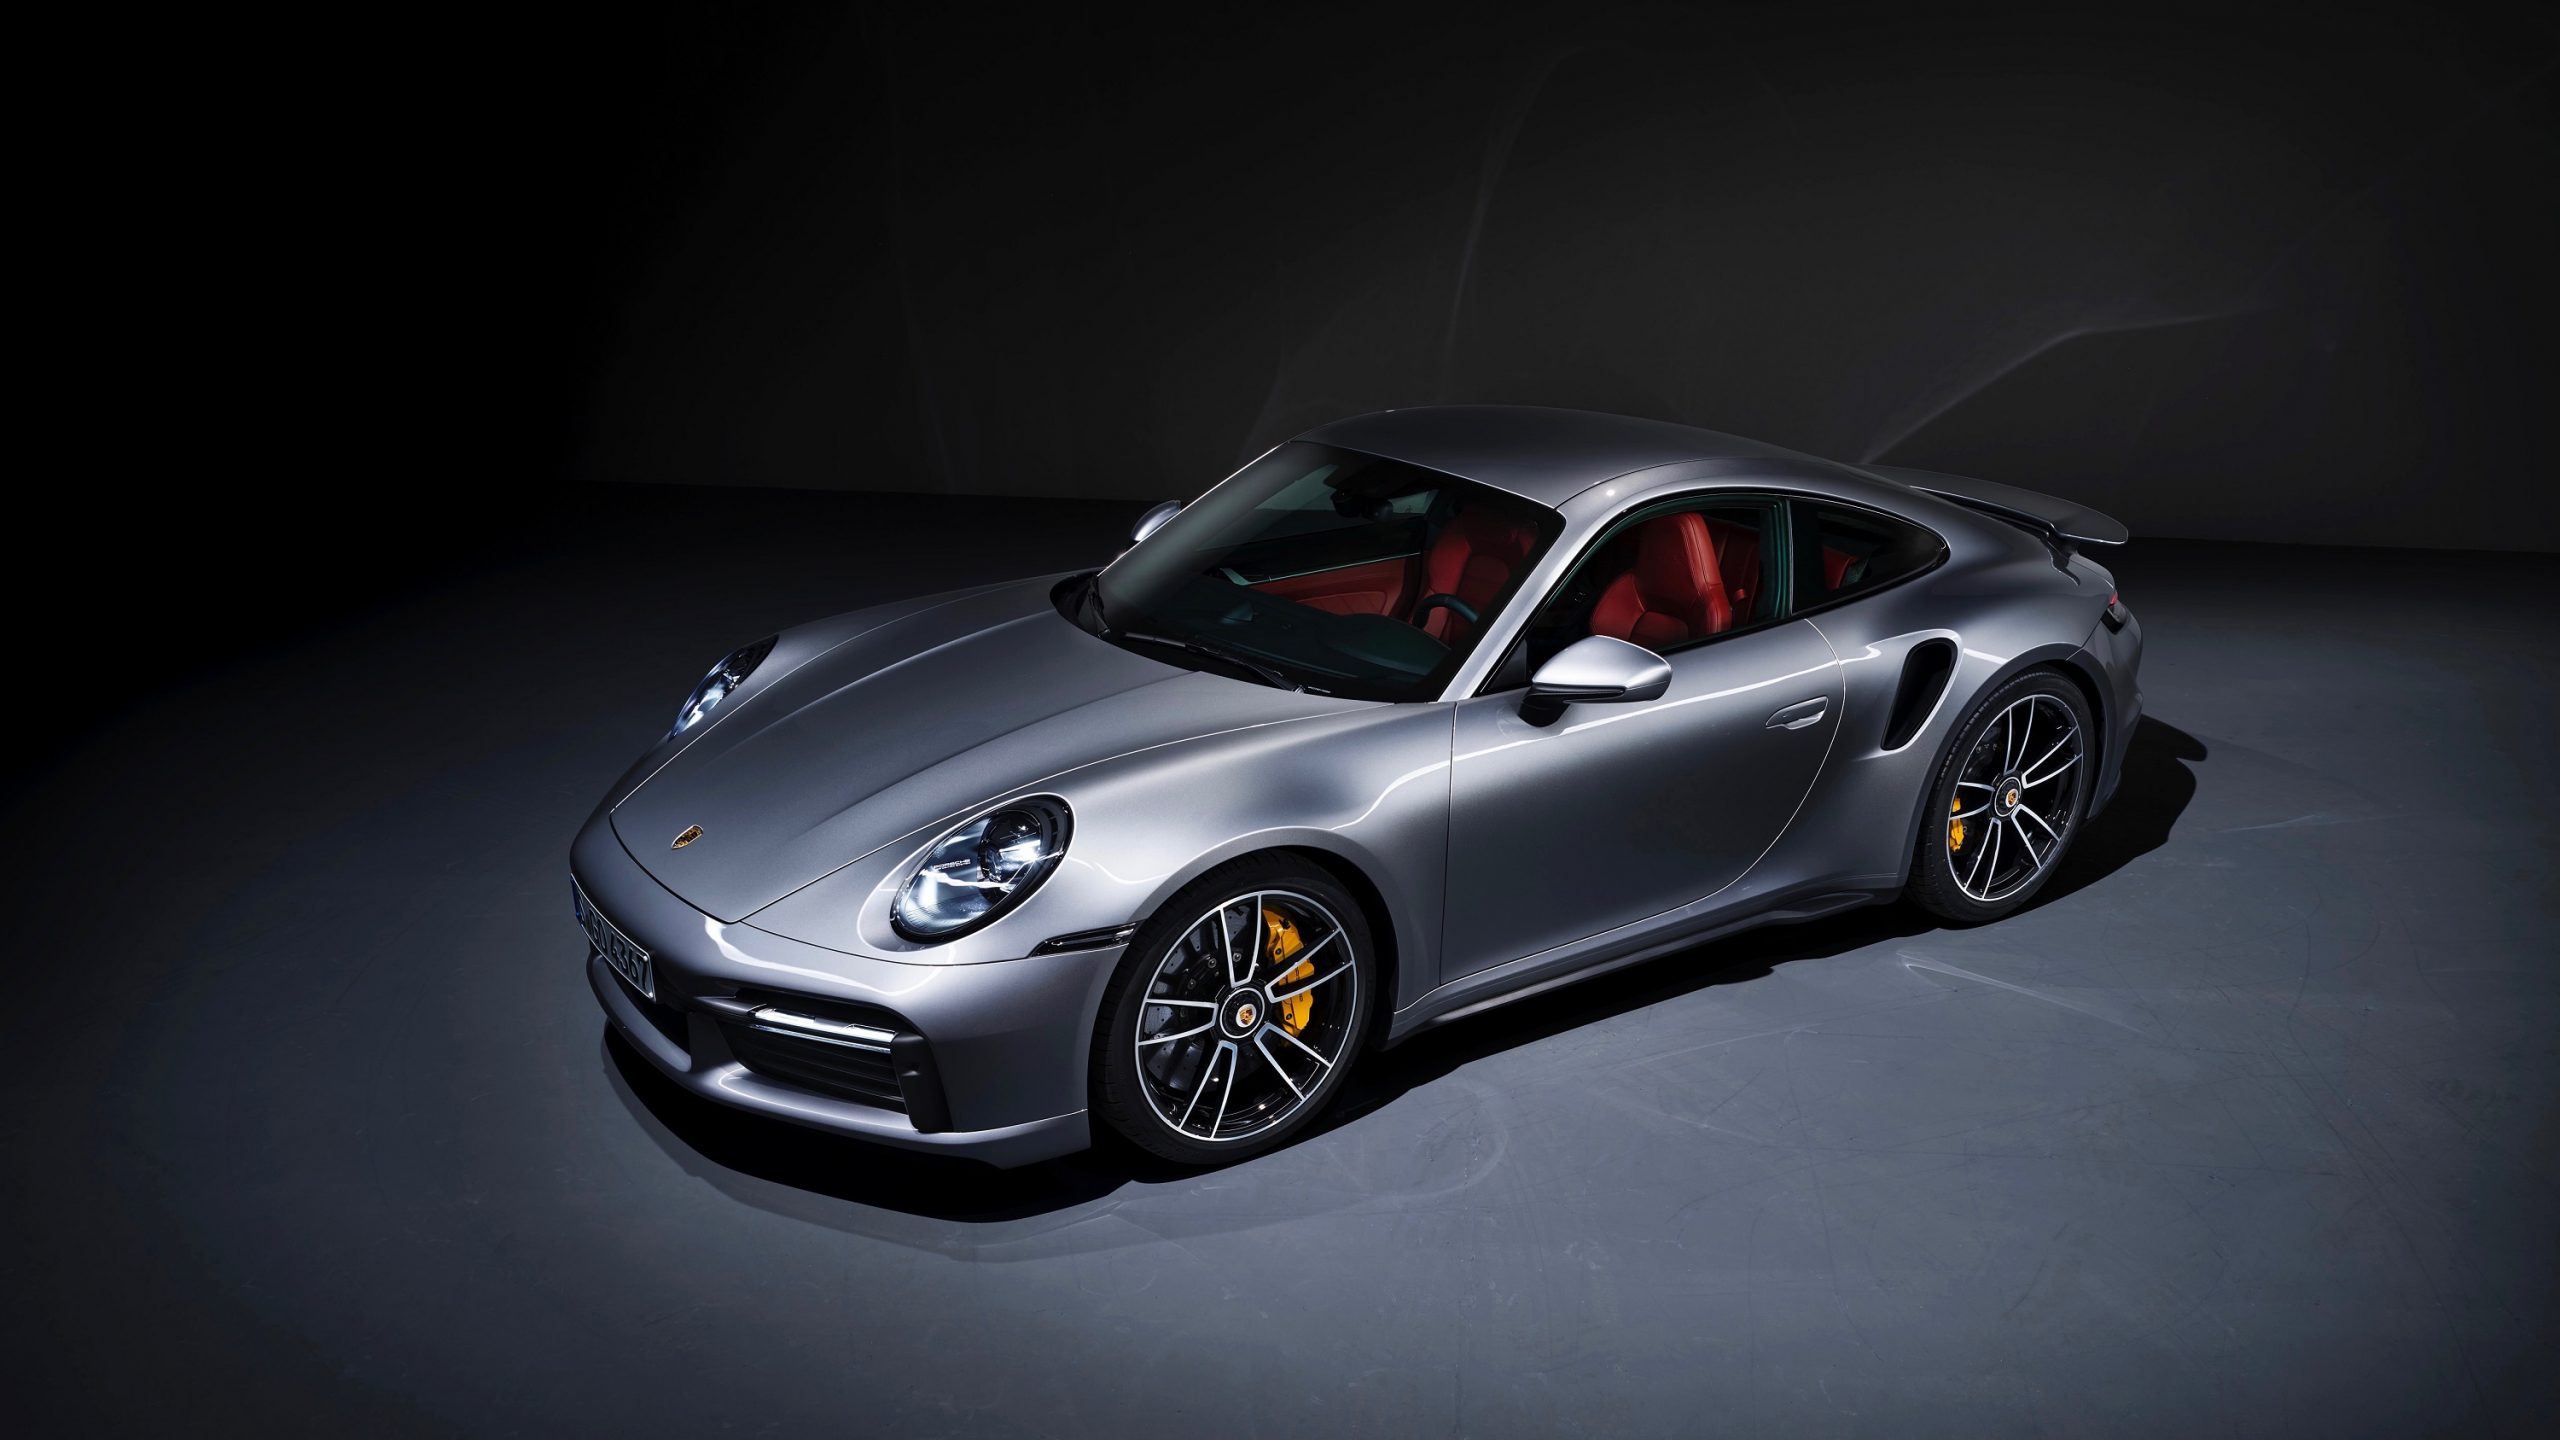 A silver Turbo S shot from the front 3/4 in a photo studio